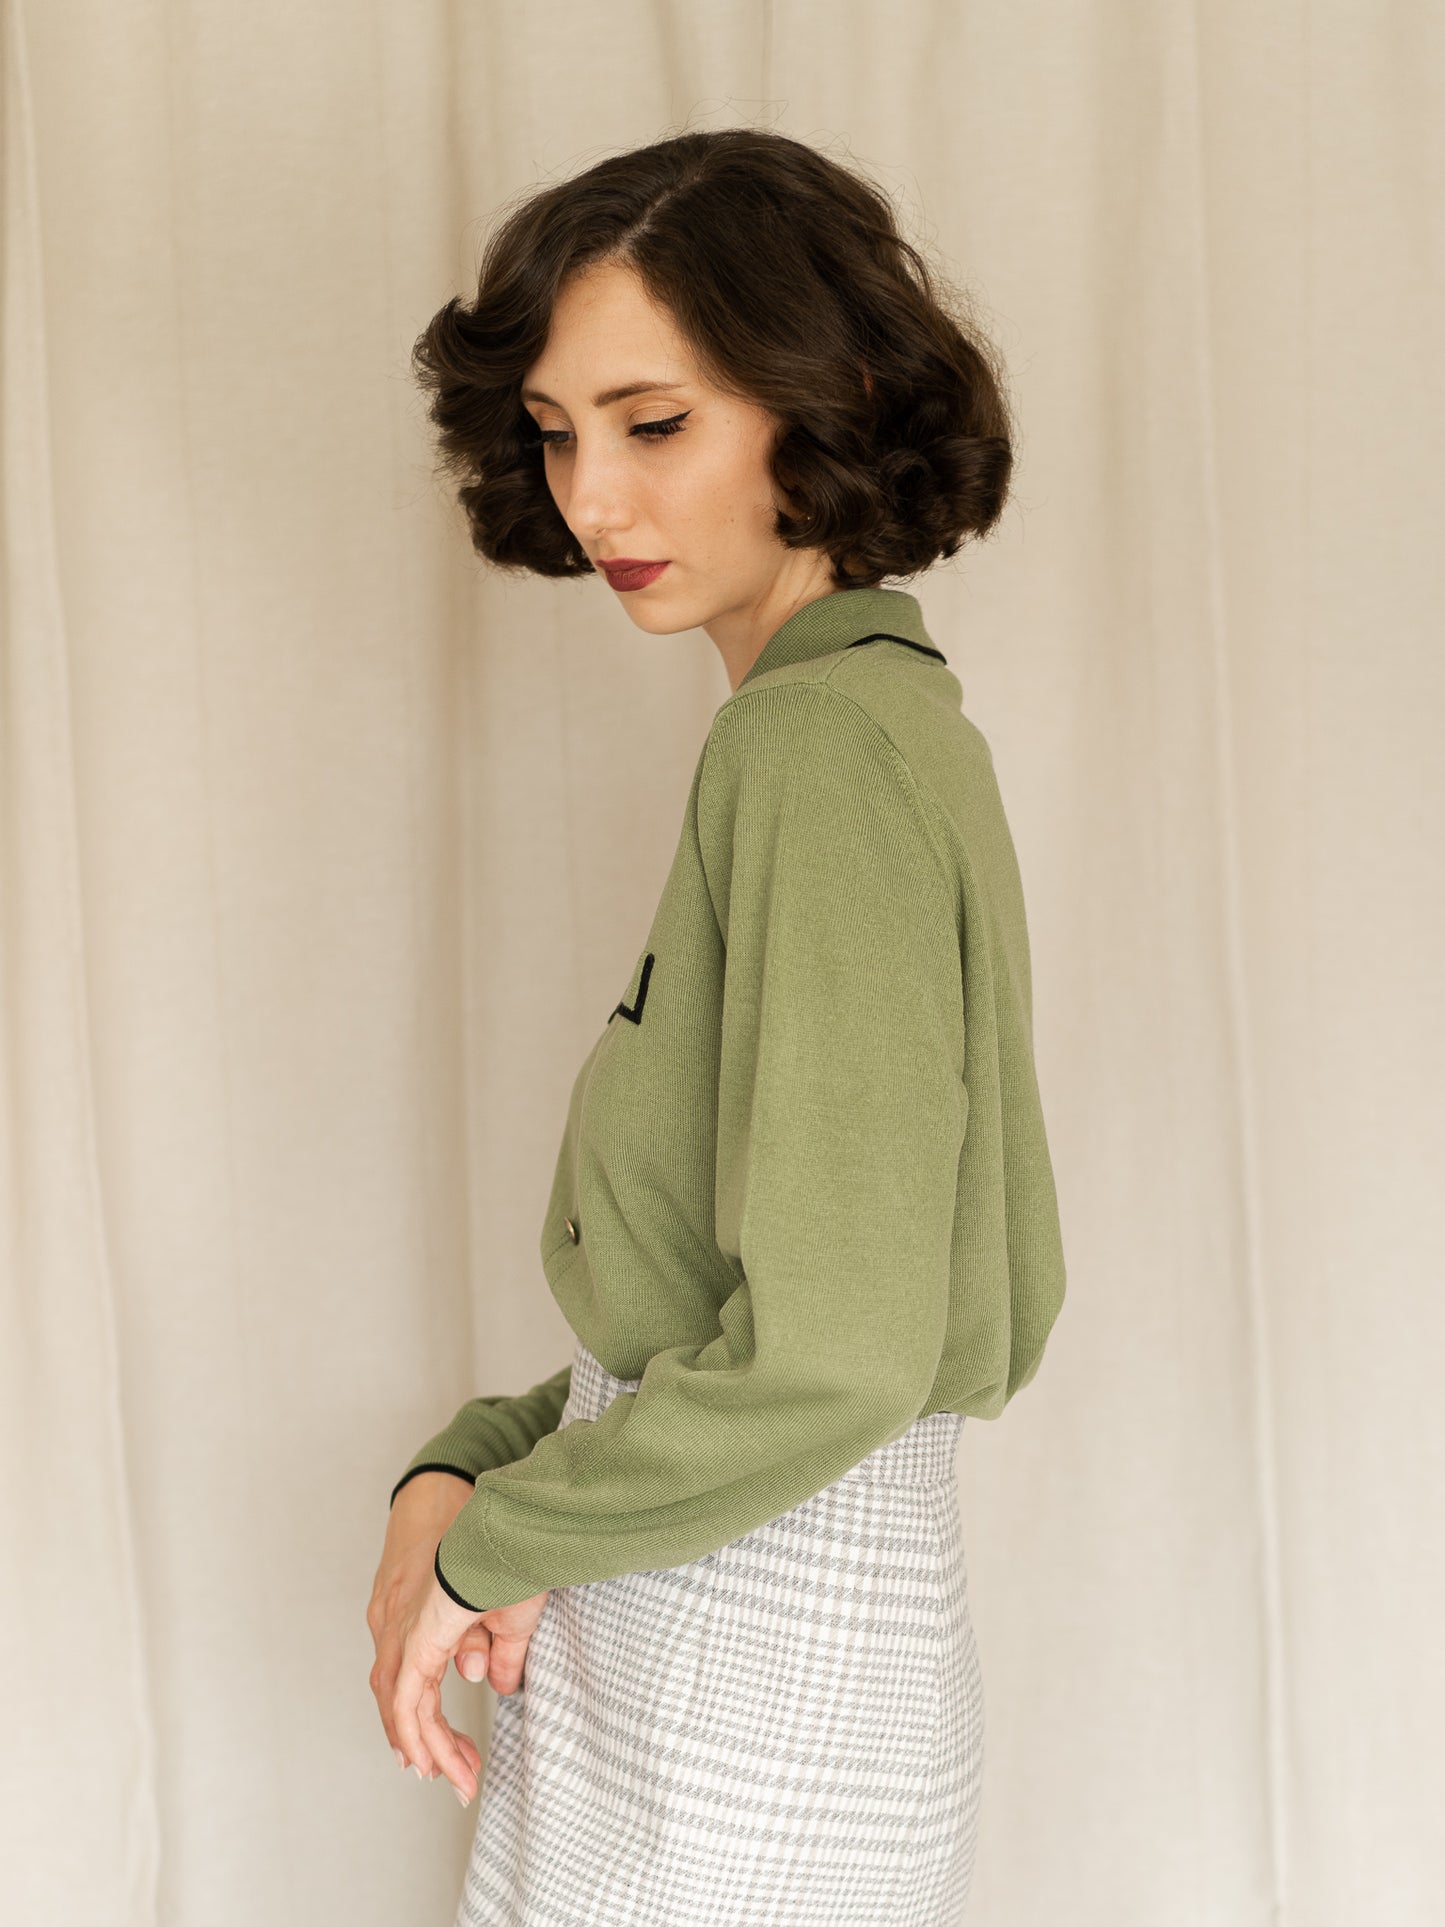 Vintage 90's Green "Blouse Like" Sweater (M)